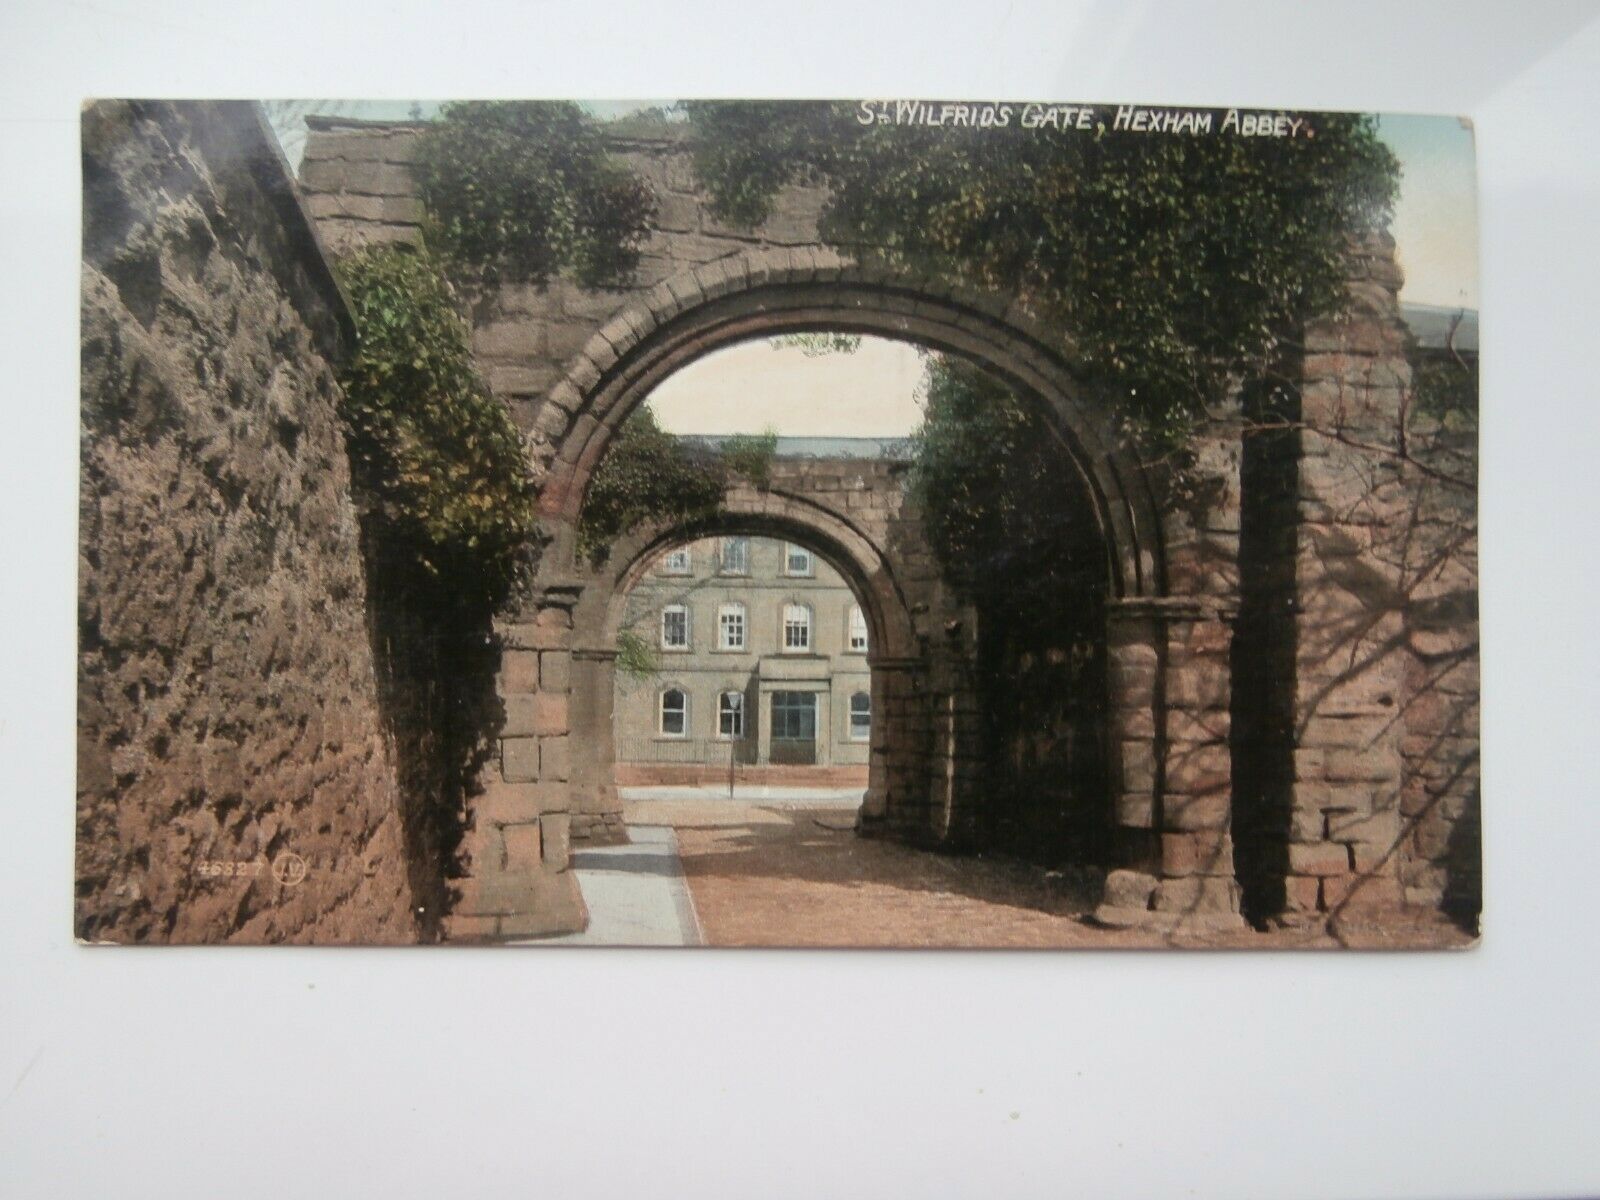 House Clearance - Hexham, Northumberland - St.Wilfrid's Gate, Hexham Abbey - 1908 service (60)